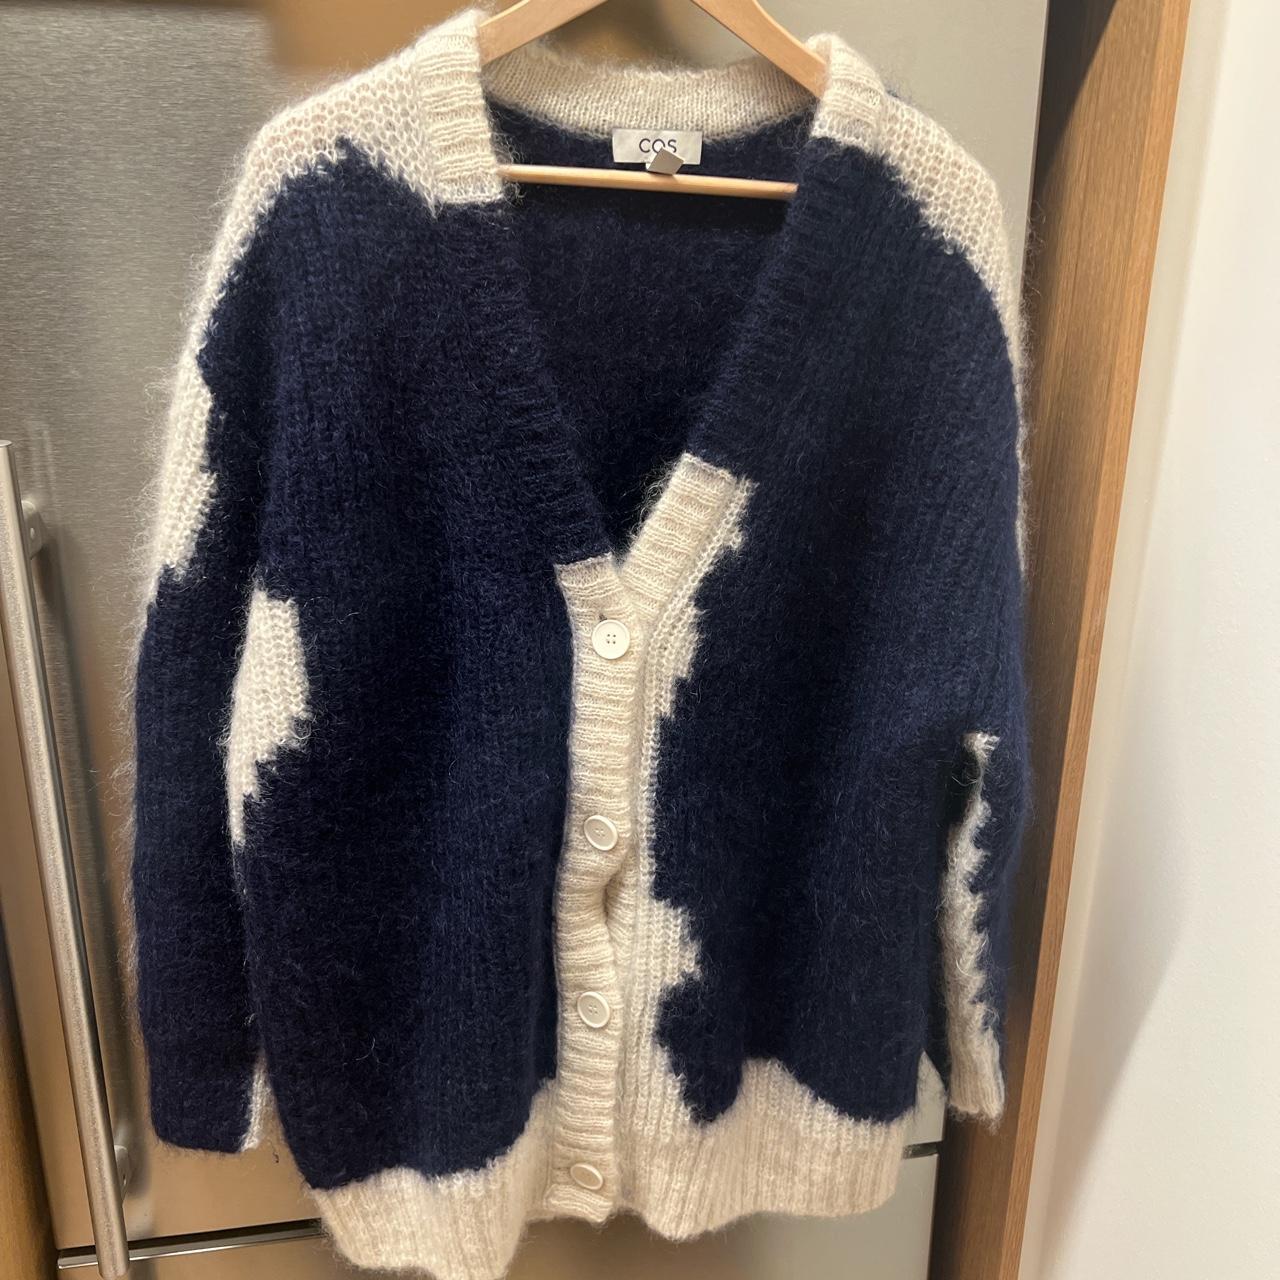 COS blue oversized mohair sweater worn one time- in... - Depop